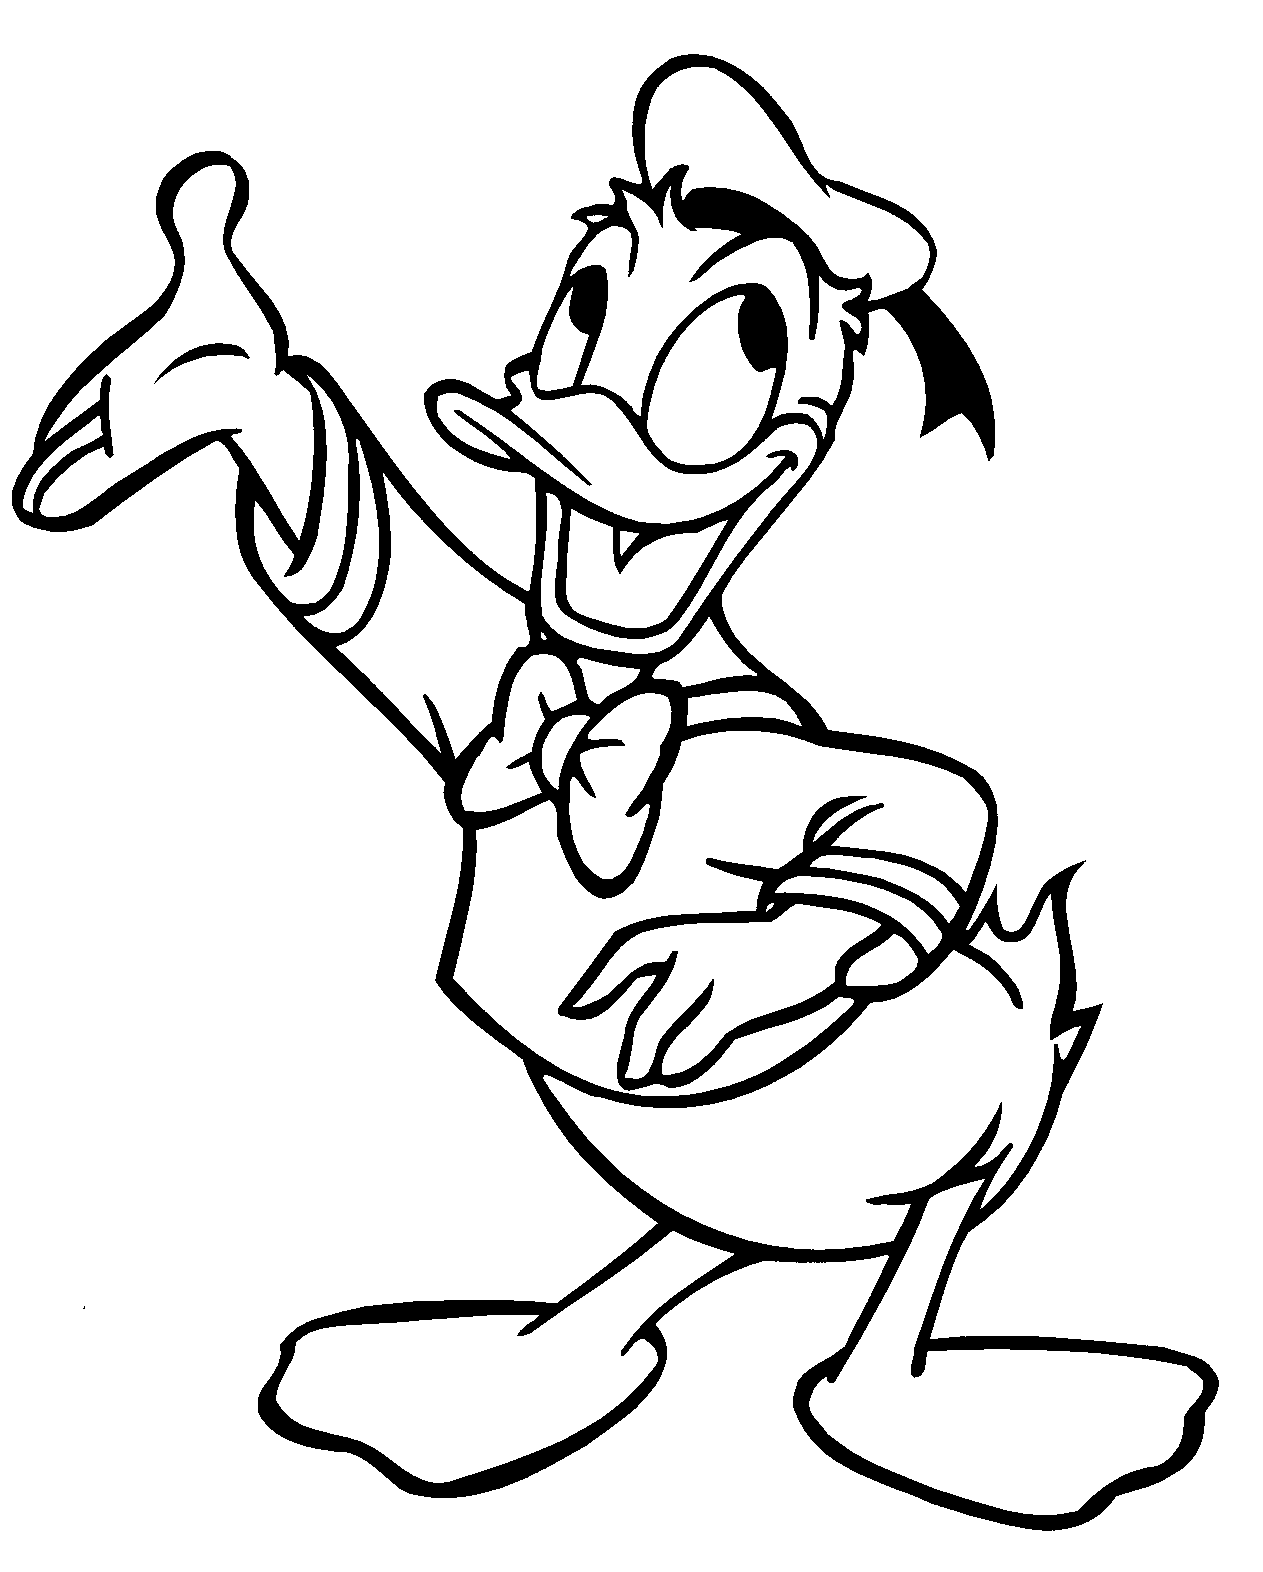 Download Free Printable Donald Duck Coloring Pages For Kids